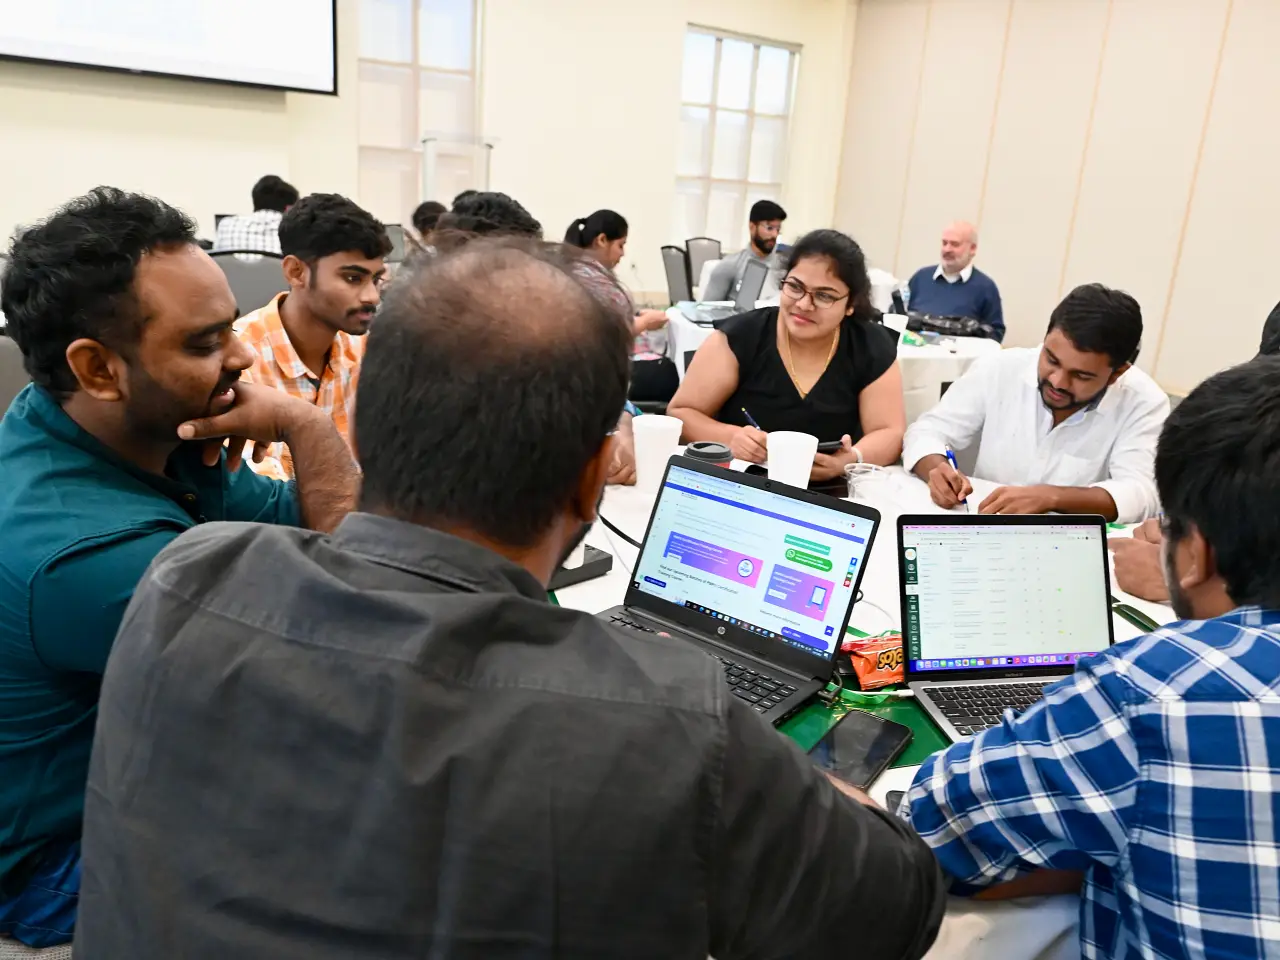 International students working together at a table